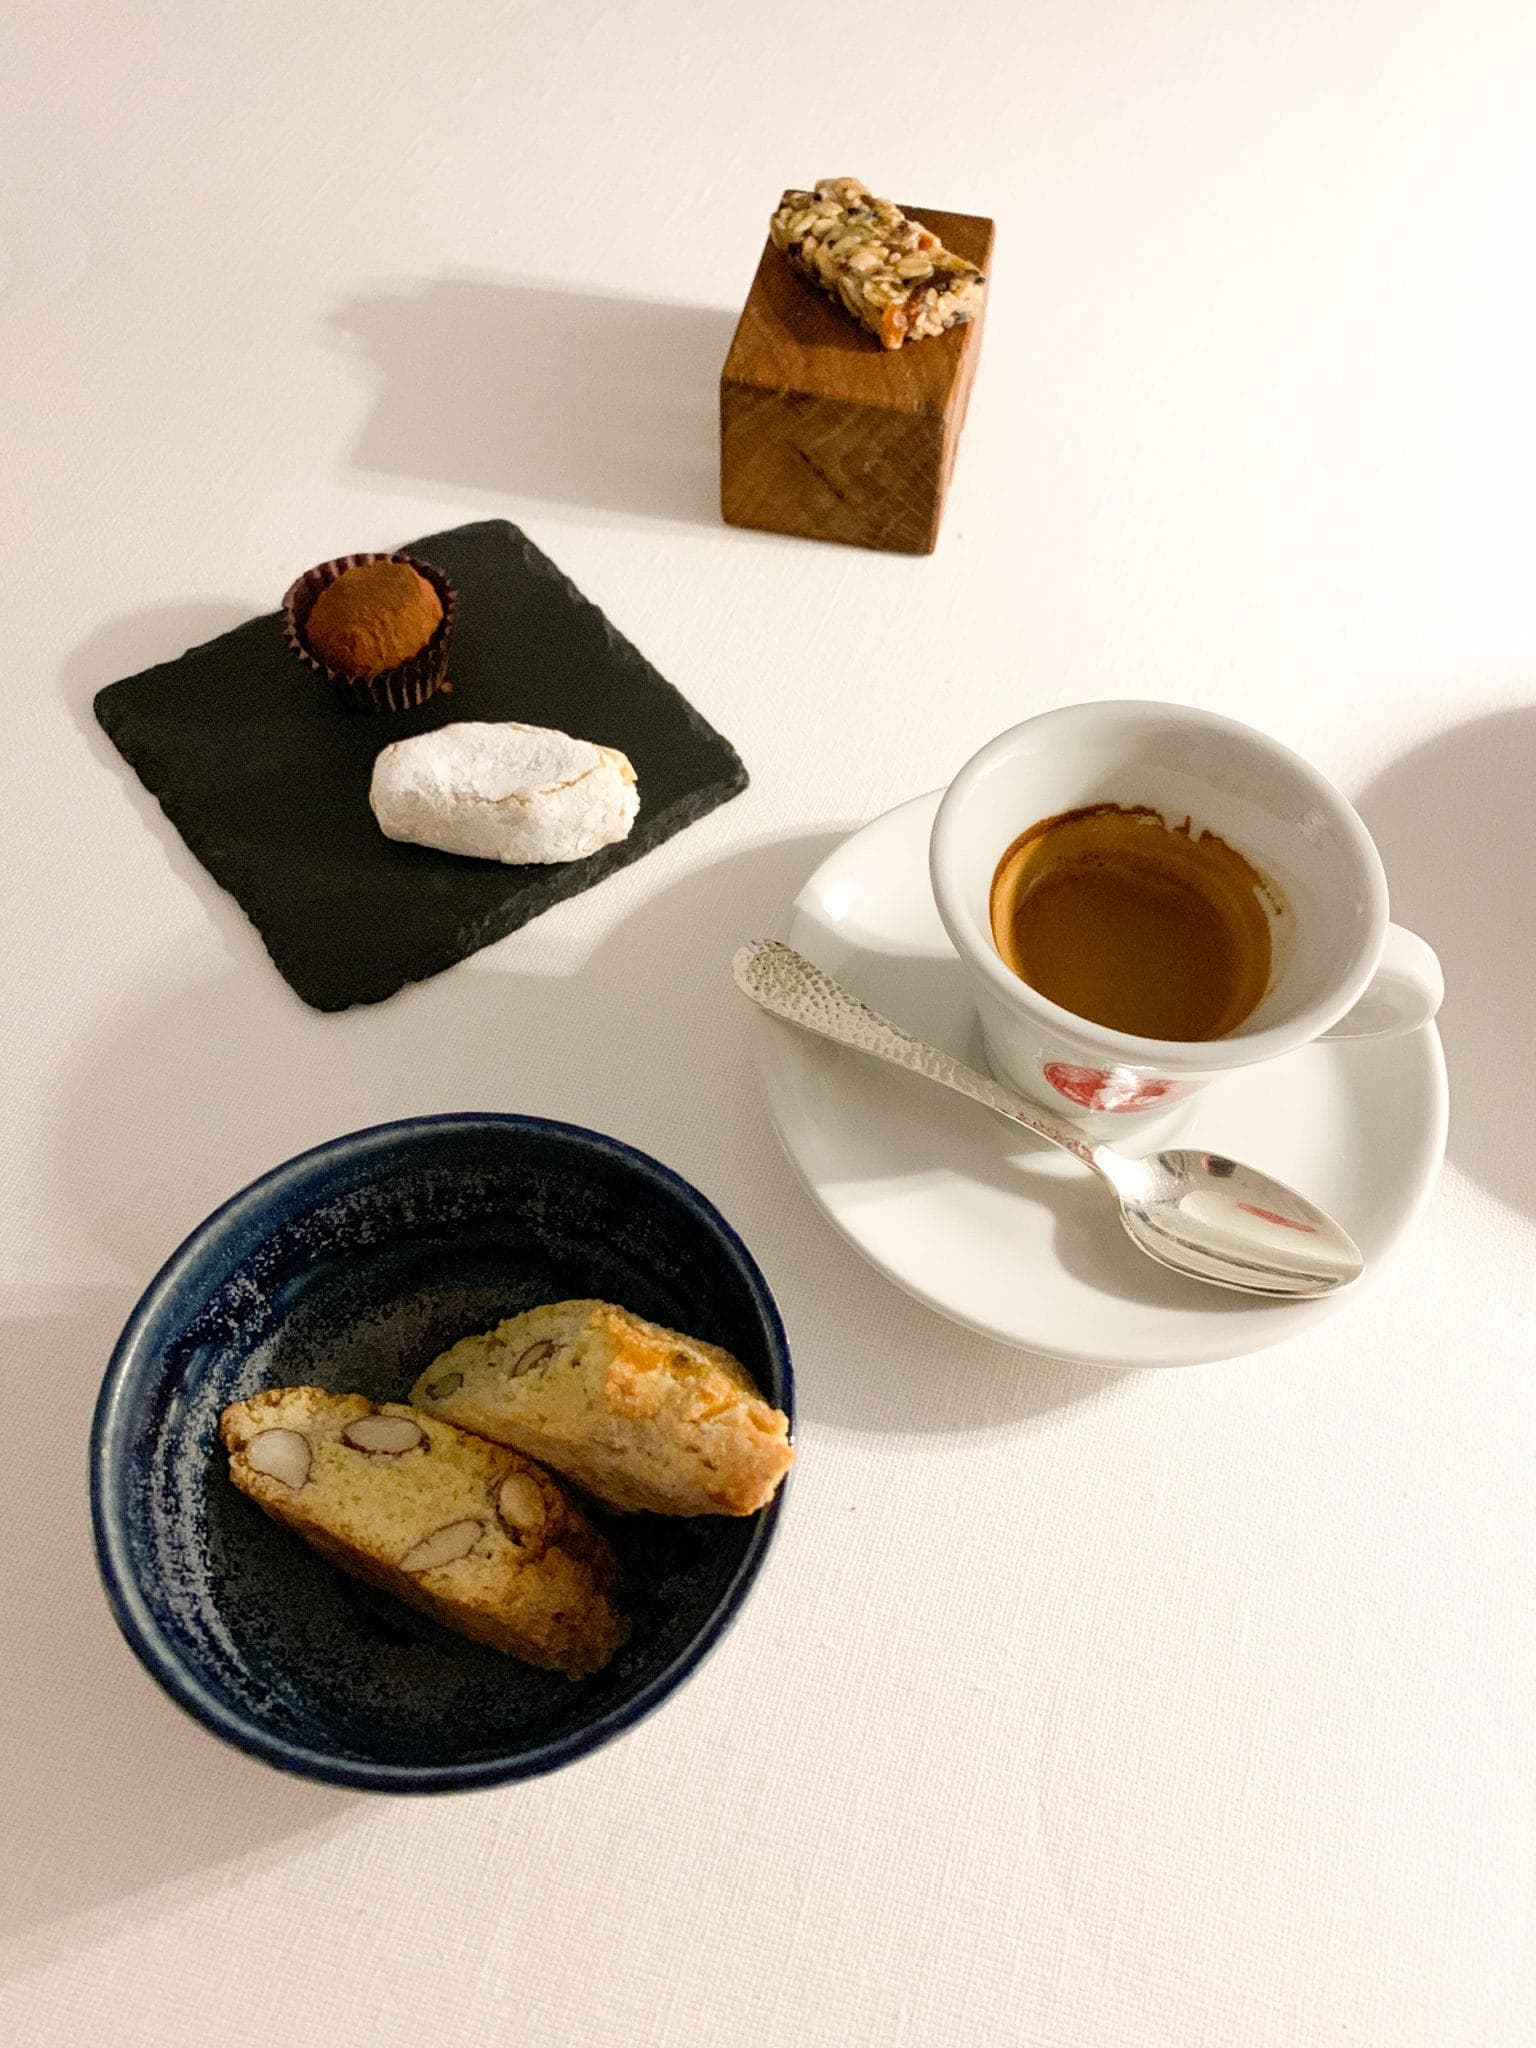 Espresso, biscotti, and chocolate truffle with honey, balsamic filling